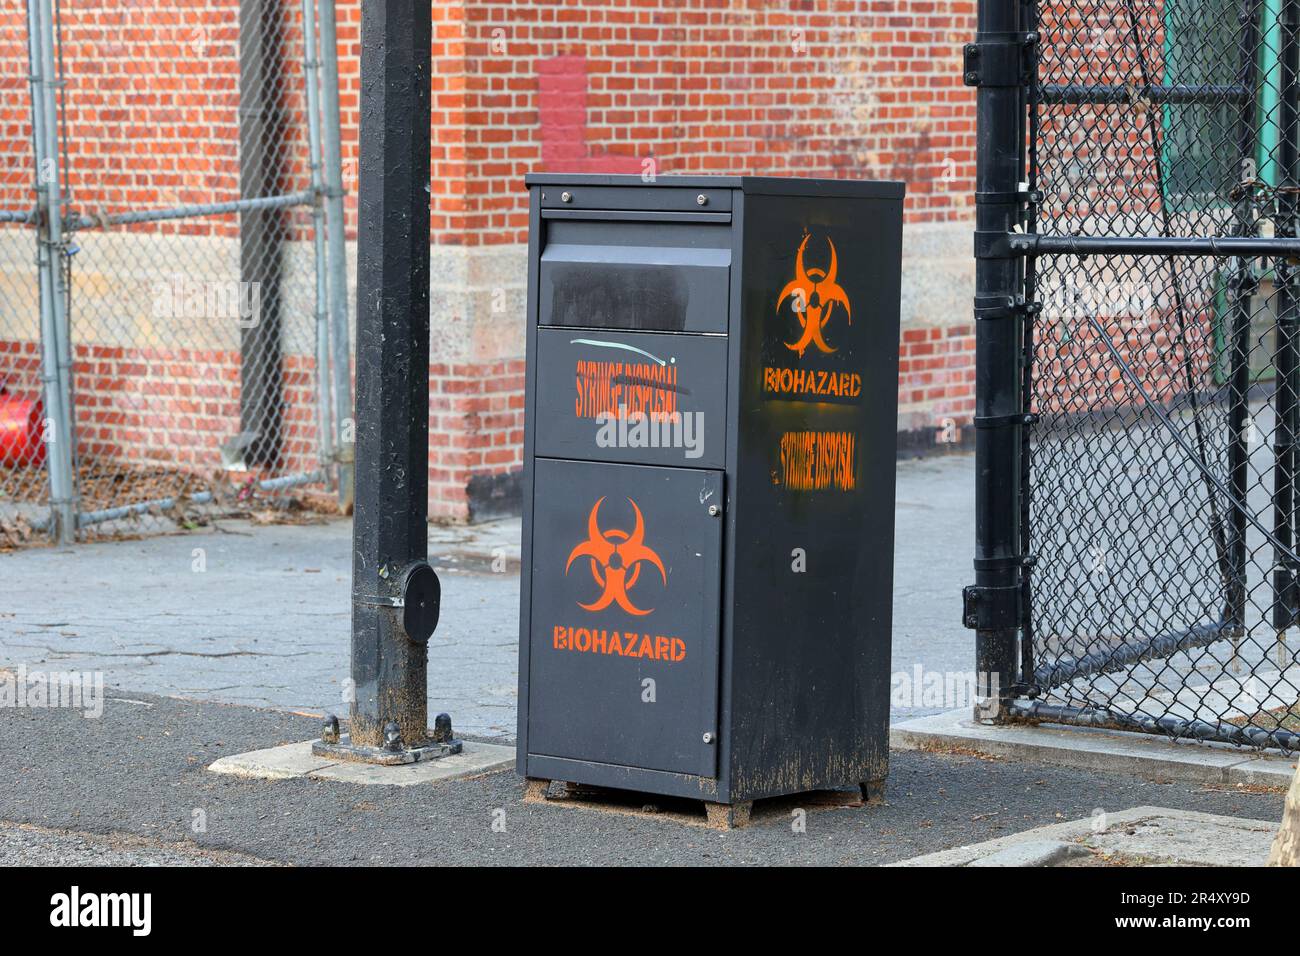 A sharps and syringe disposal bin for the collection of hypodermic needles in a NYC park where no other safe disposal means are available. Stock Photo